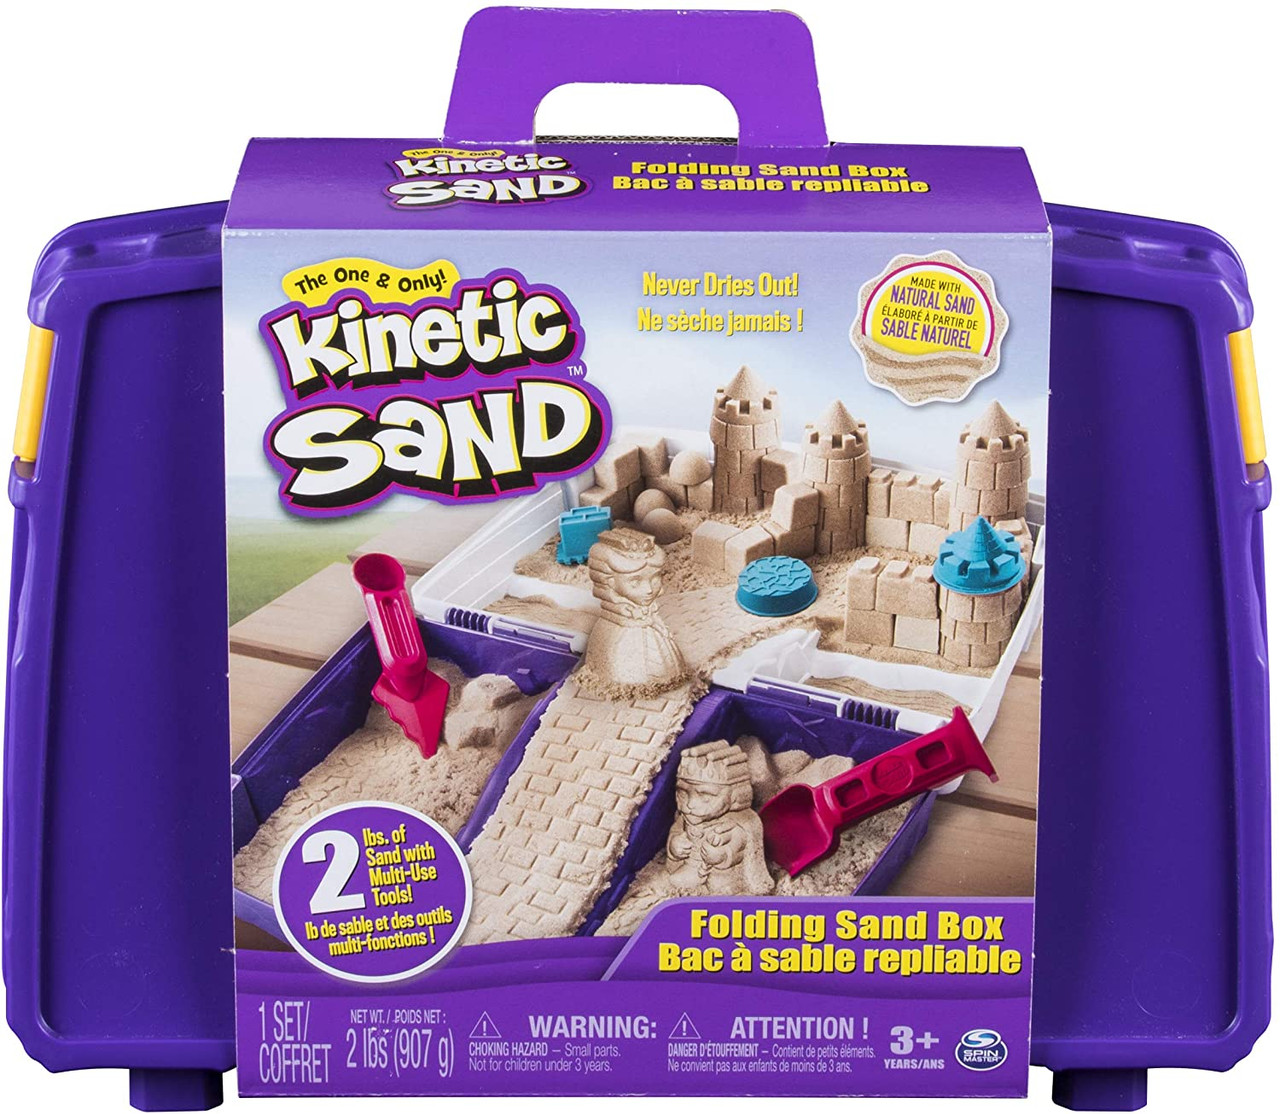 Kinetic Sand - Sandcastle Set with 1lb of Kinetic Sand and Tools and Molds  (Color May Vary)